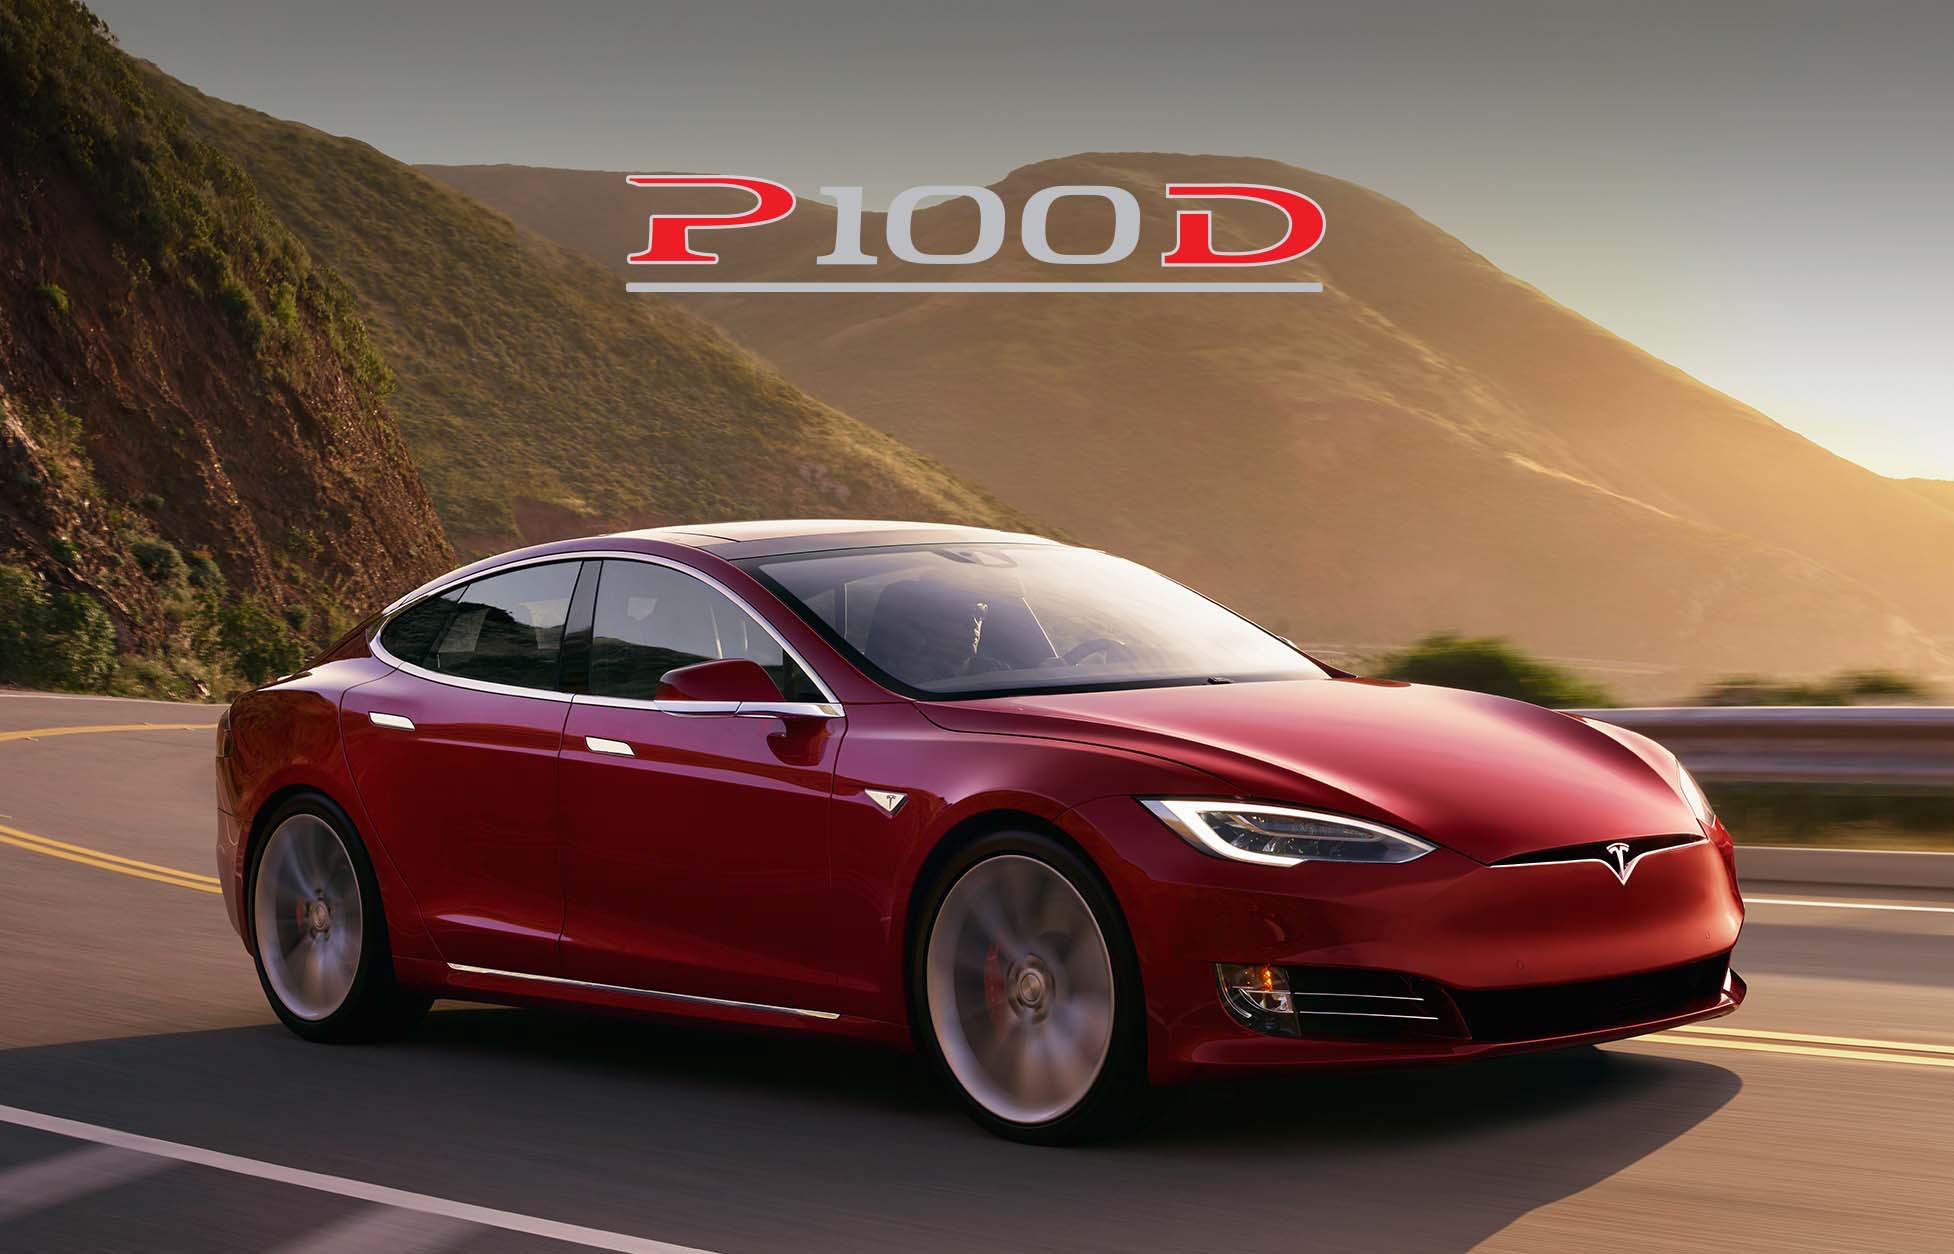 Update for Tesla P100D does 0-60mph in 2.4 seconds, Elon Musk confirms